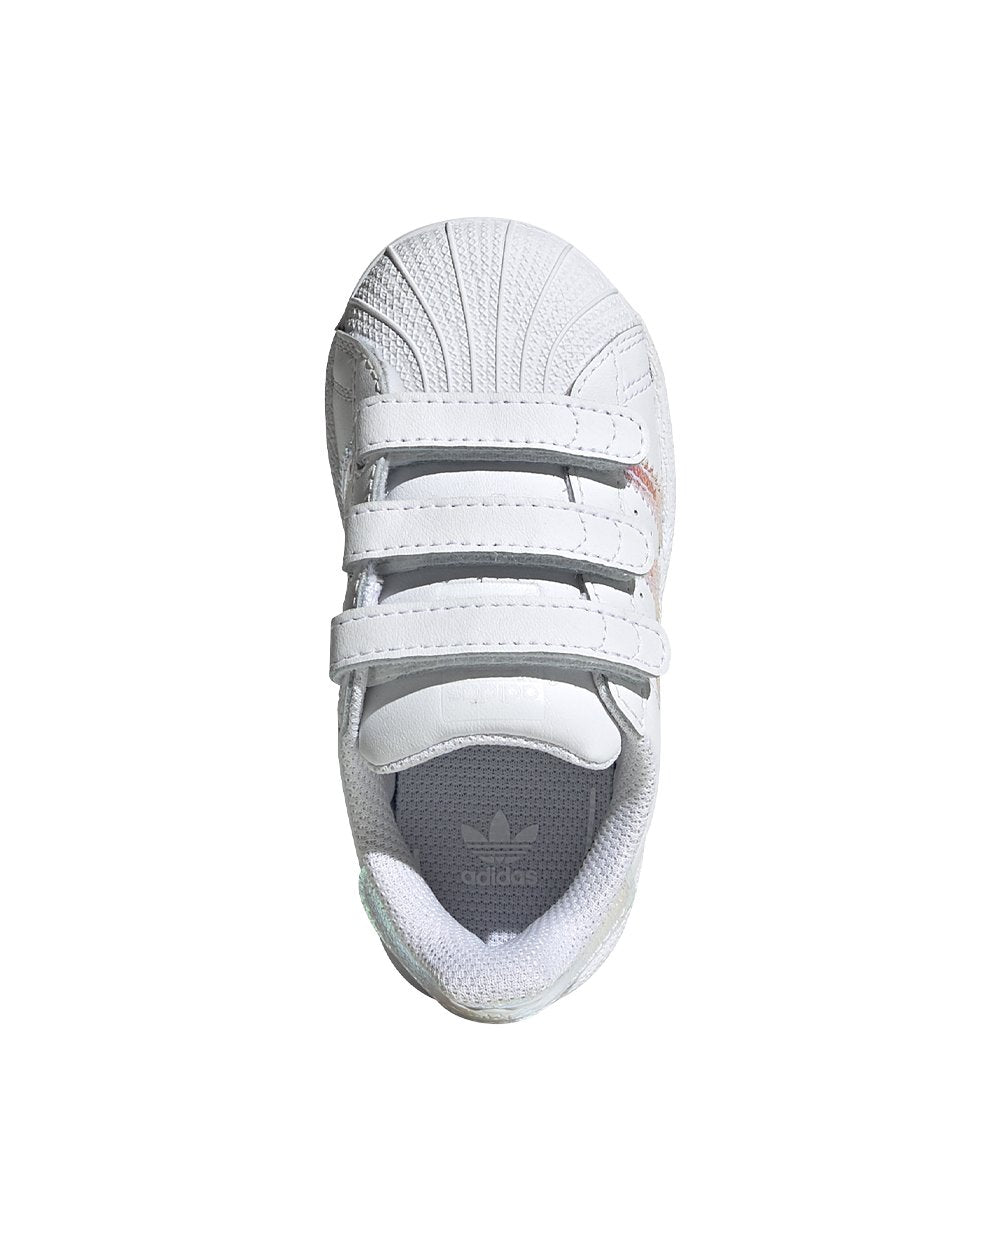 Adidas Superstar White with Bright and Velcro